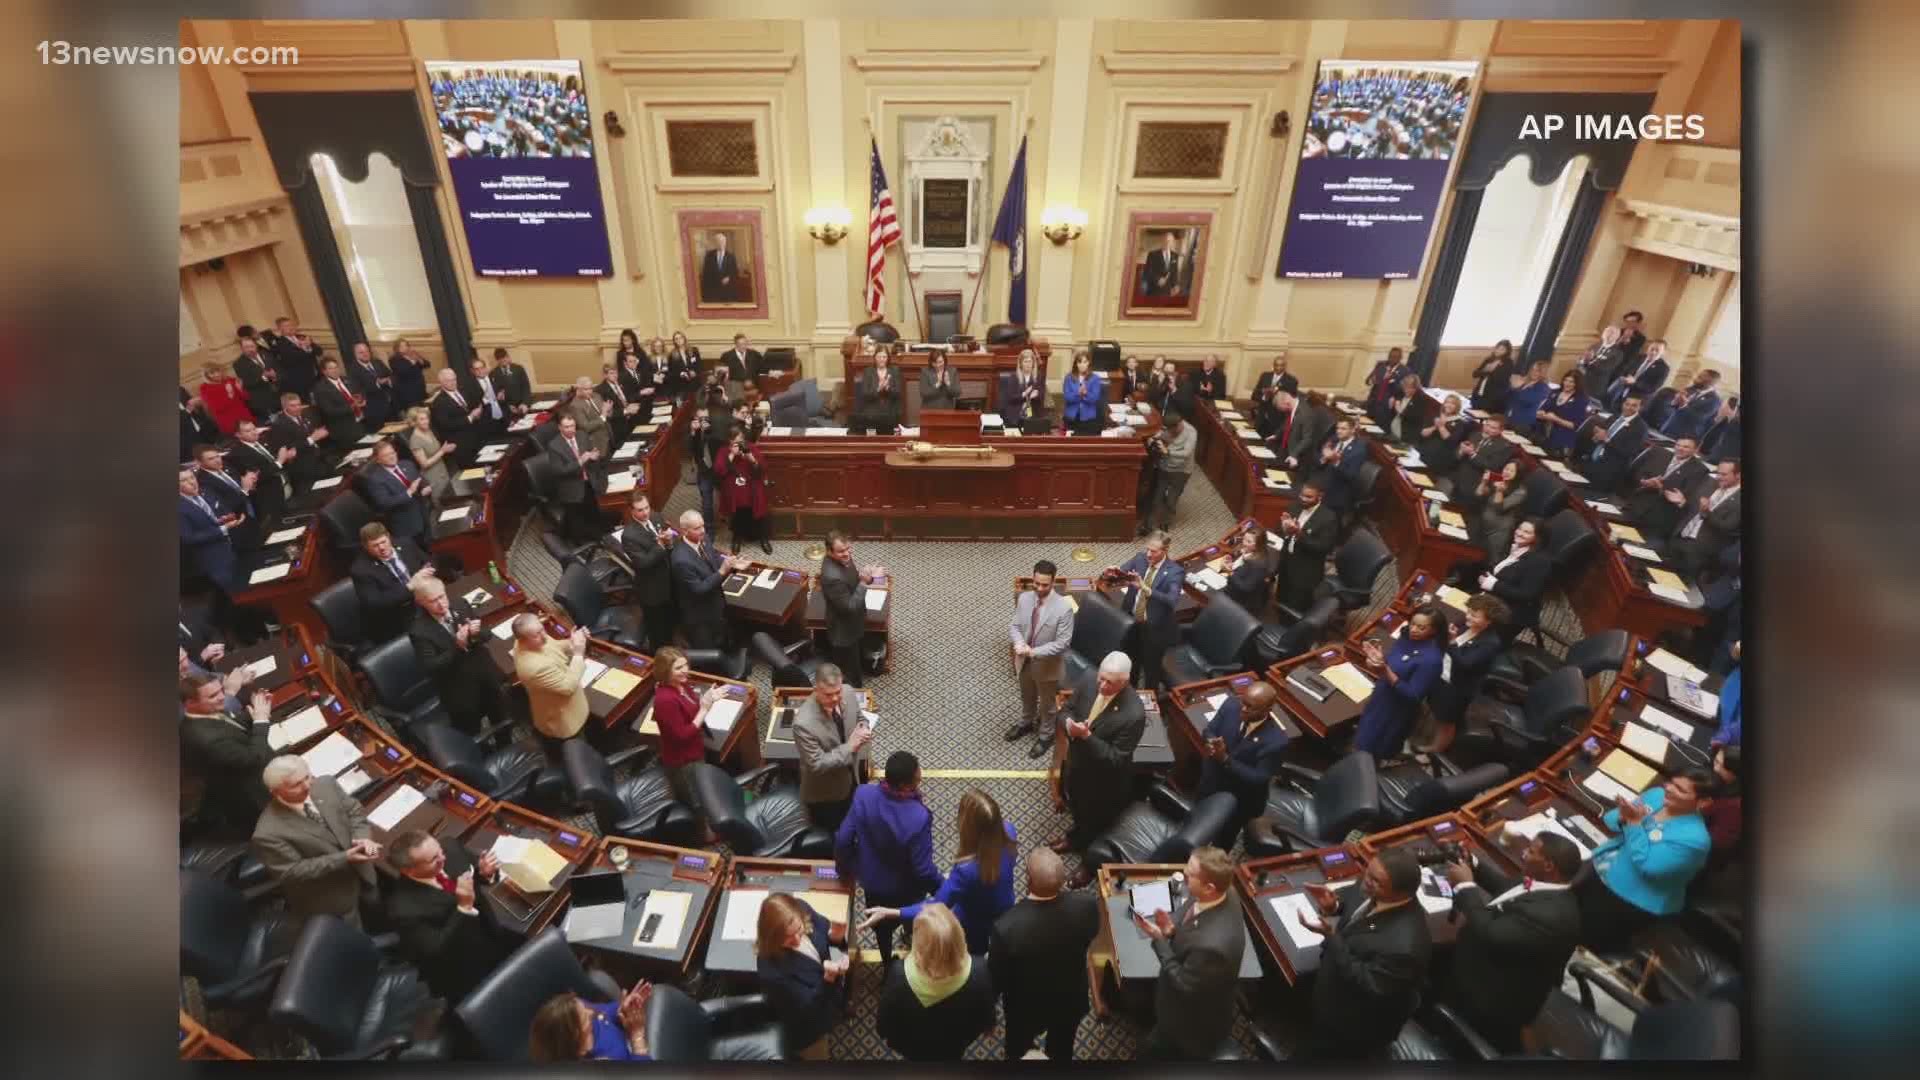 During the 2020 General Assembly, lawmakers passed sweeping legislation on everything from gun control to cannabis decriminalization to confederate monuments.